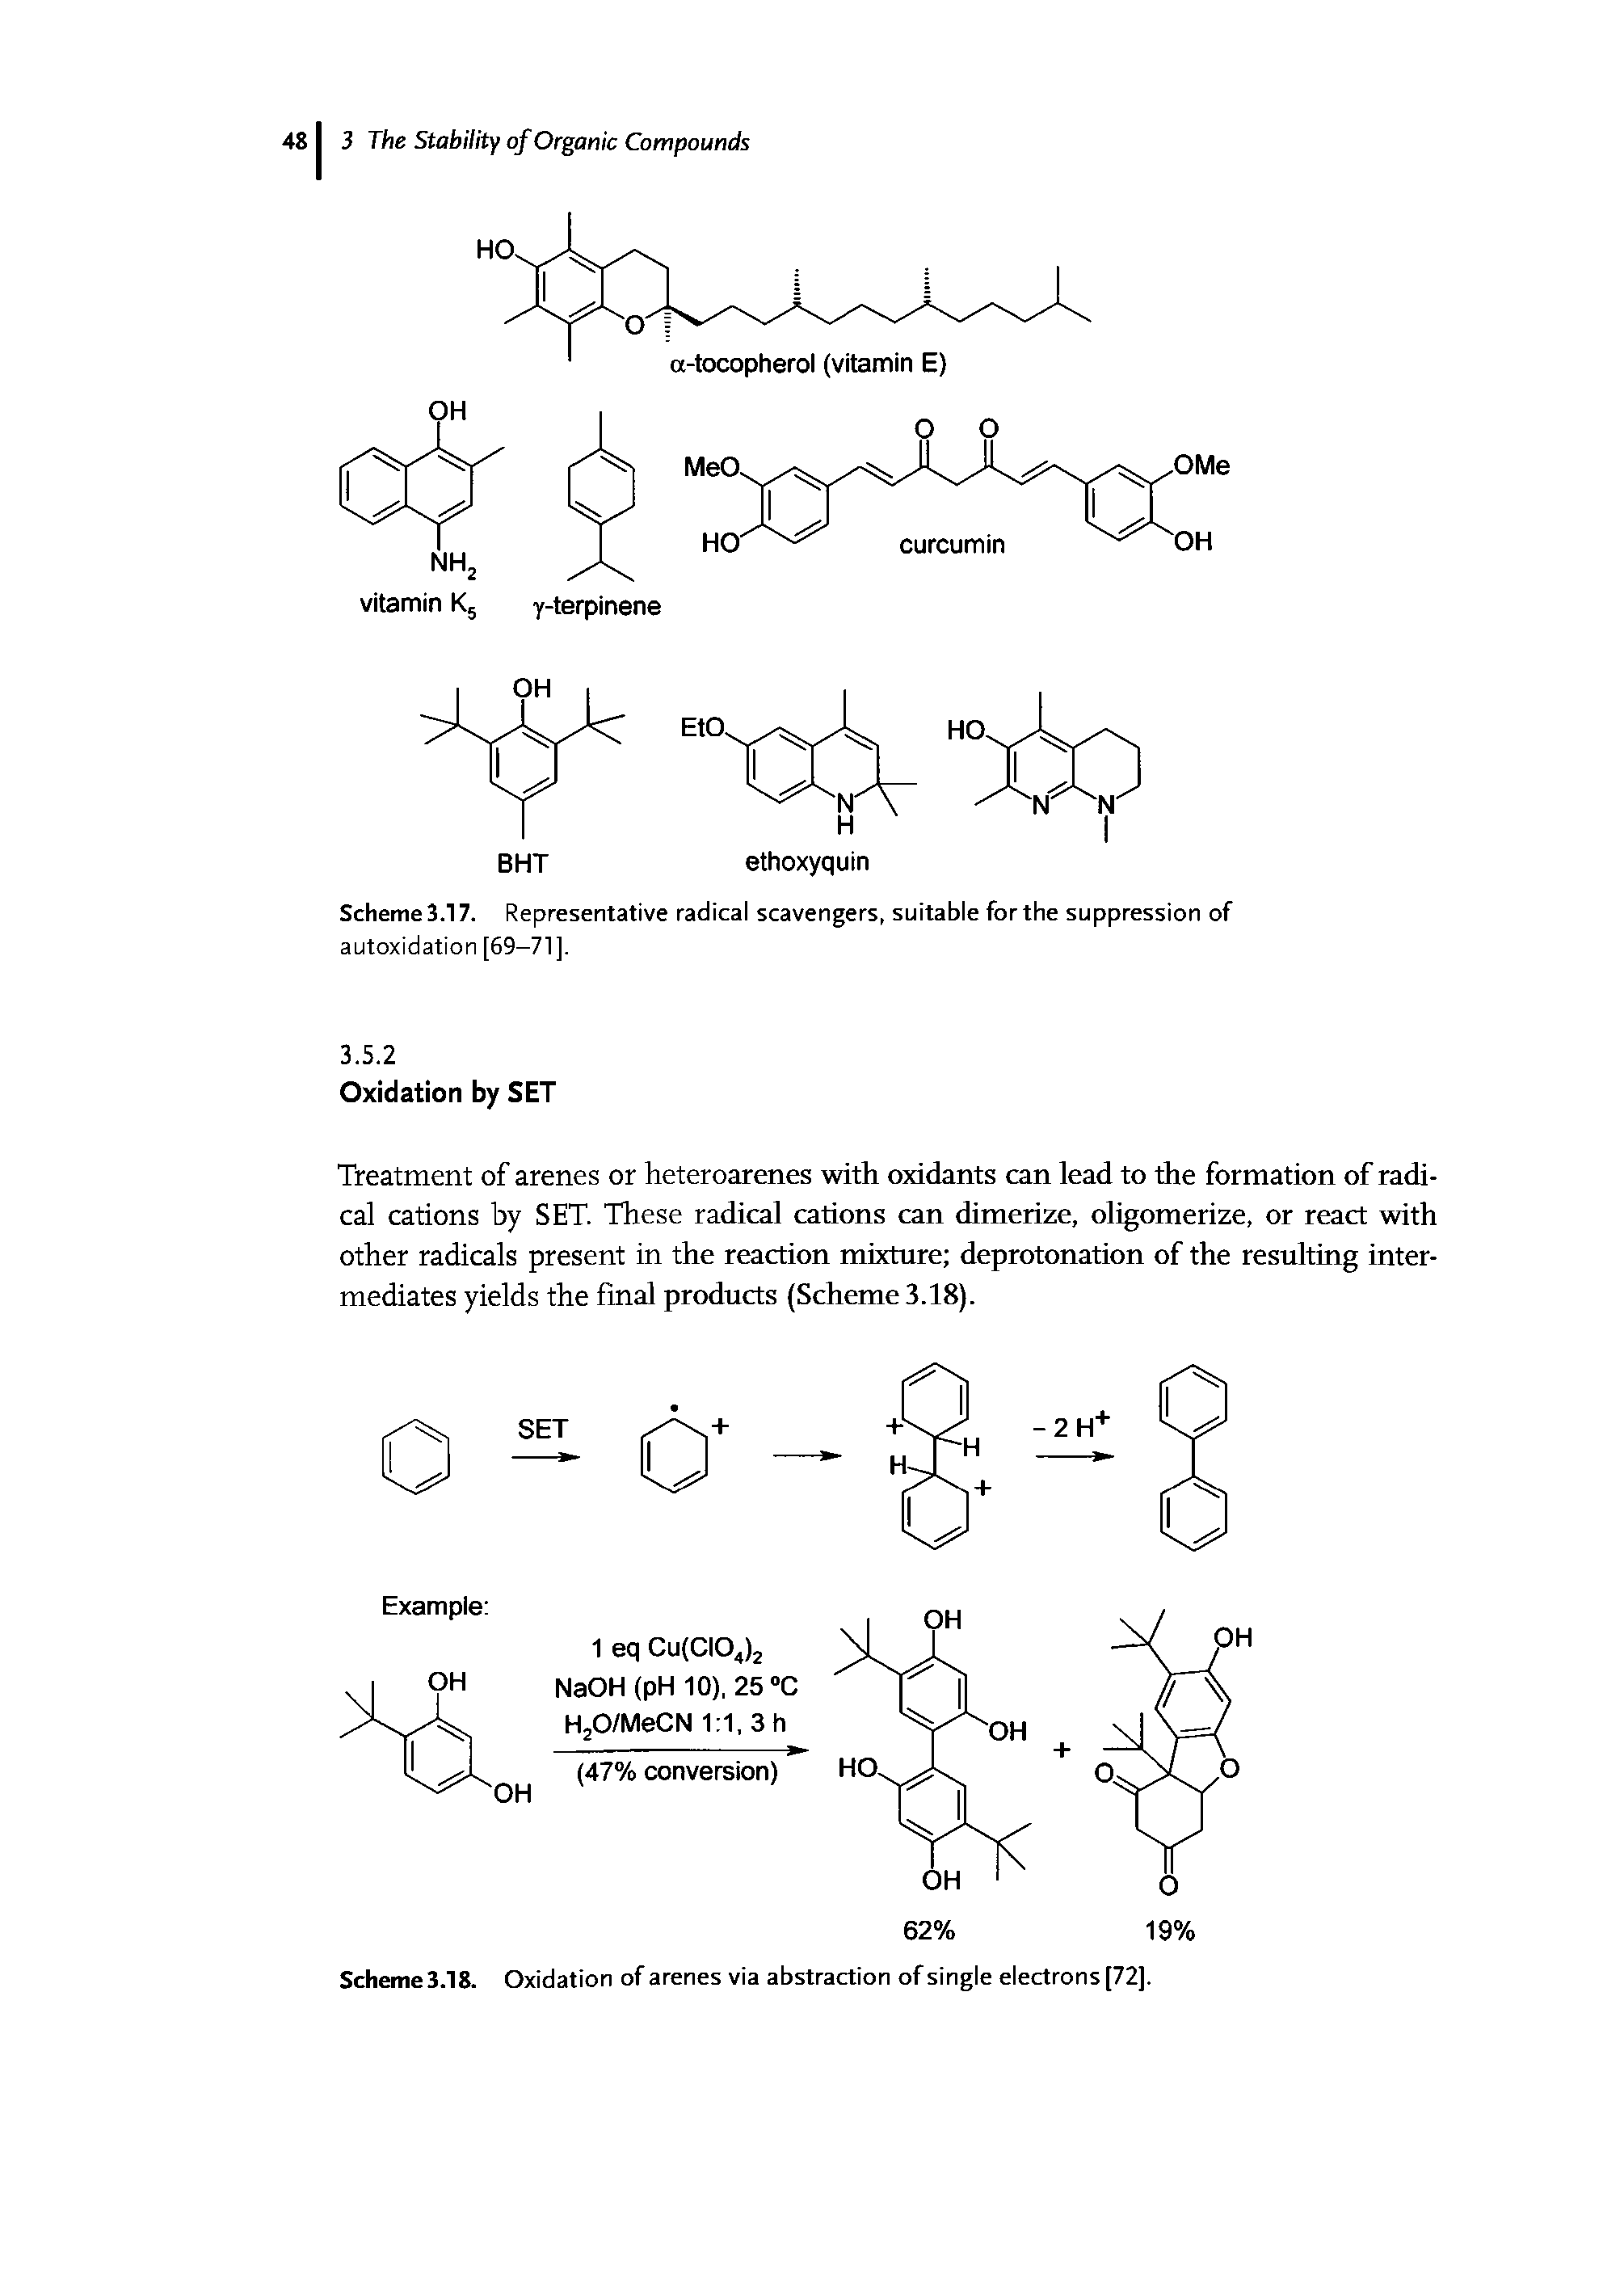 Scheme 3.18. Oxidation of arenes via abstraction of single electrons [72].